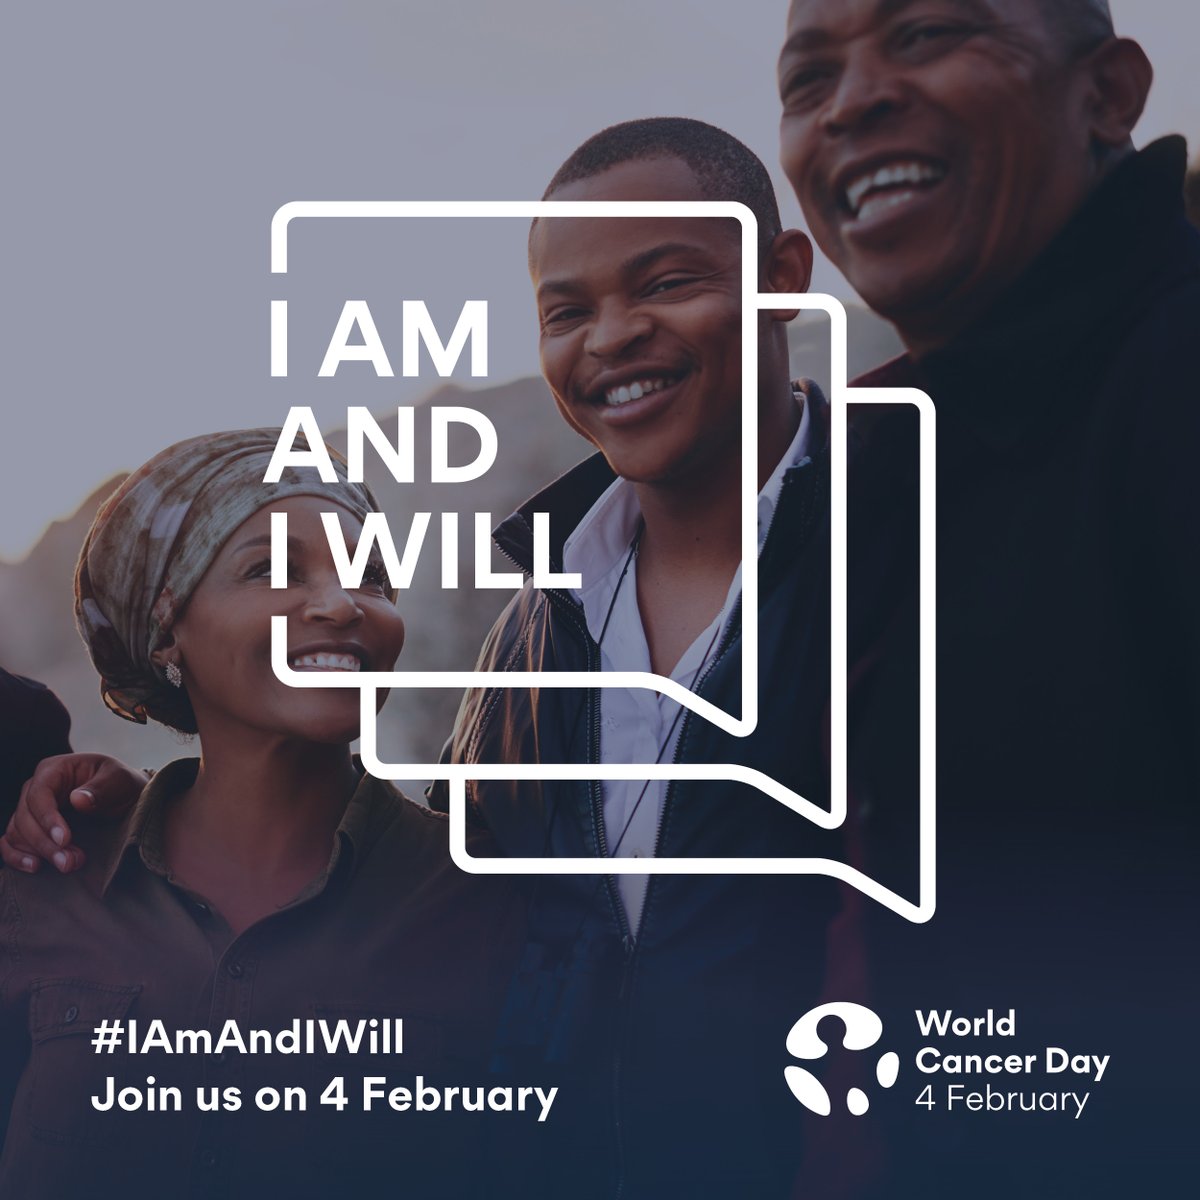 Each person deserves the right to access quality essential cancer services on #equal terms, based on need and not on the ability to pay. Speak up this 4 Feb #WorldCancerDay #IAmAndIWill